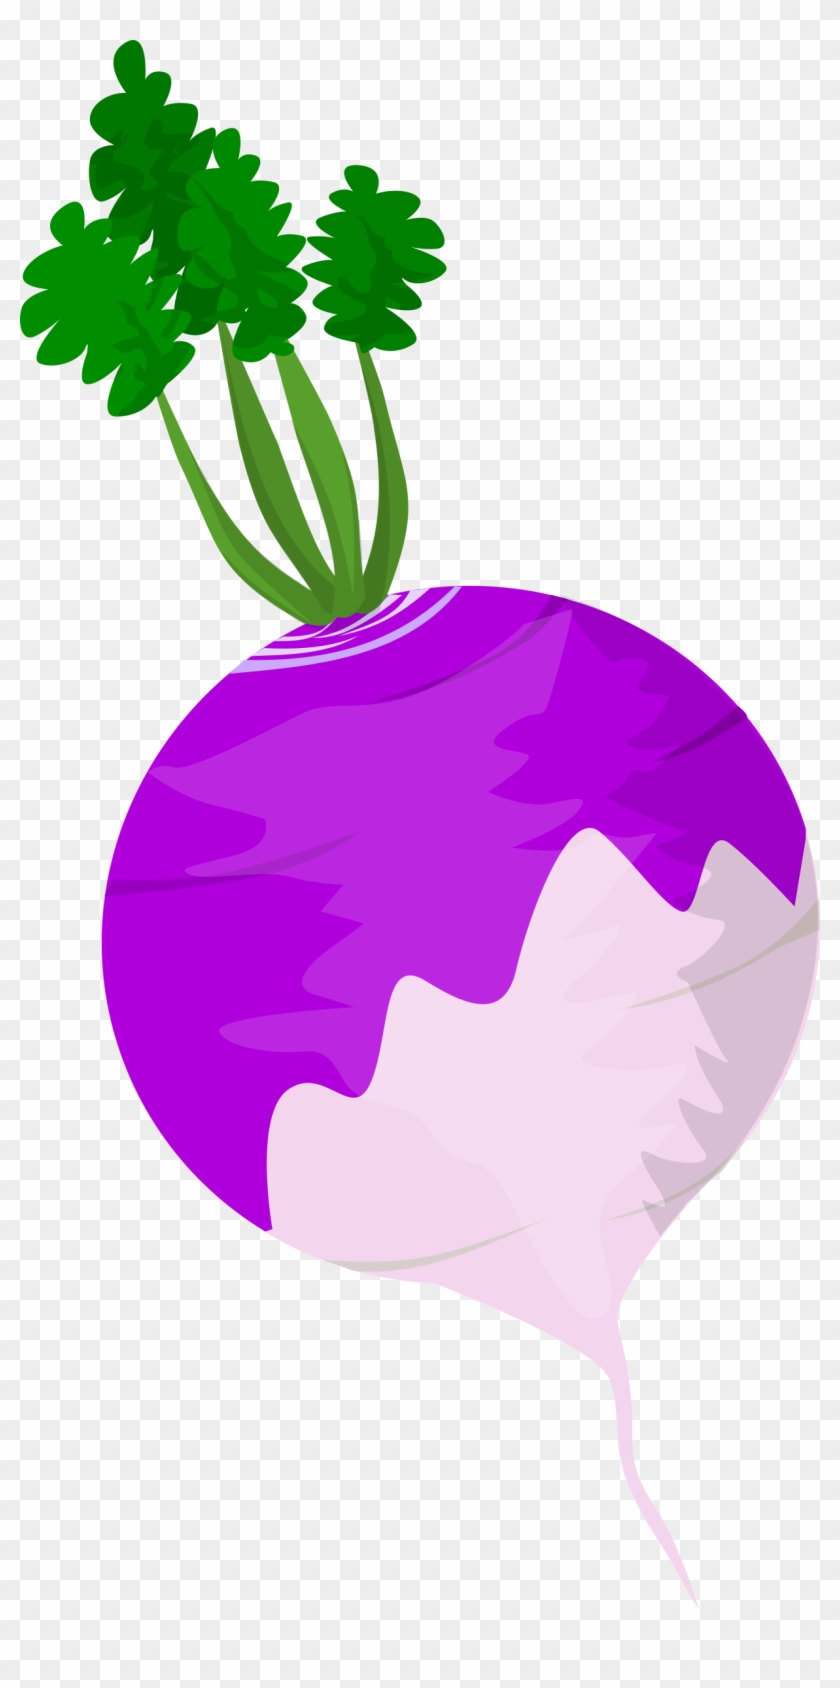 Vegetables Clipart Turnip - Clip Art Of Turnip - Png Download #4676508